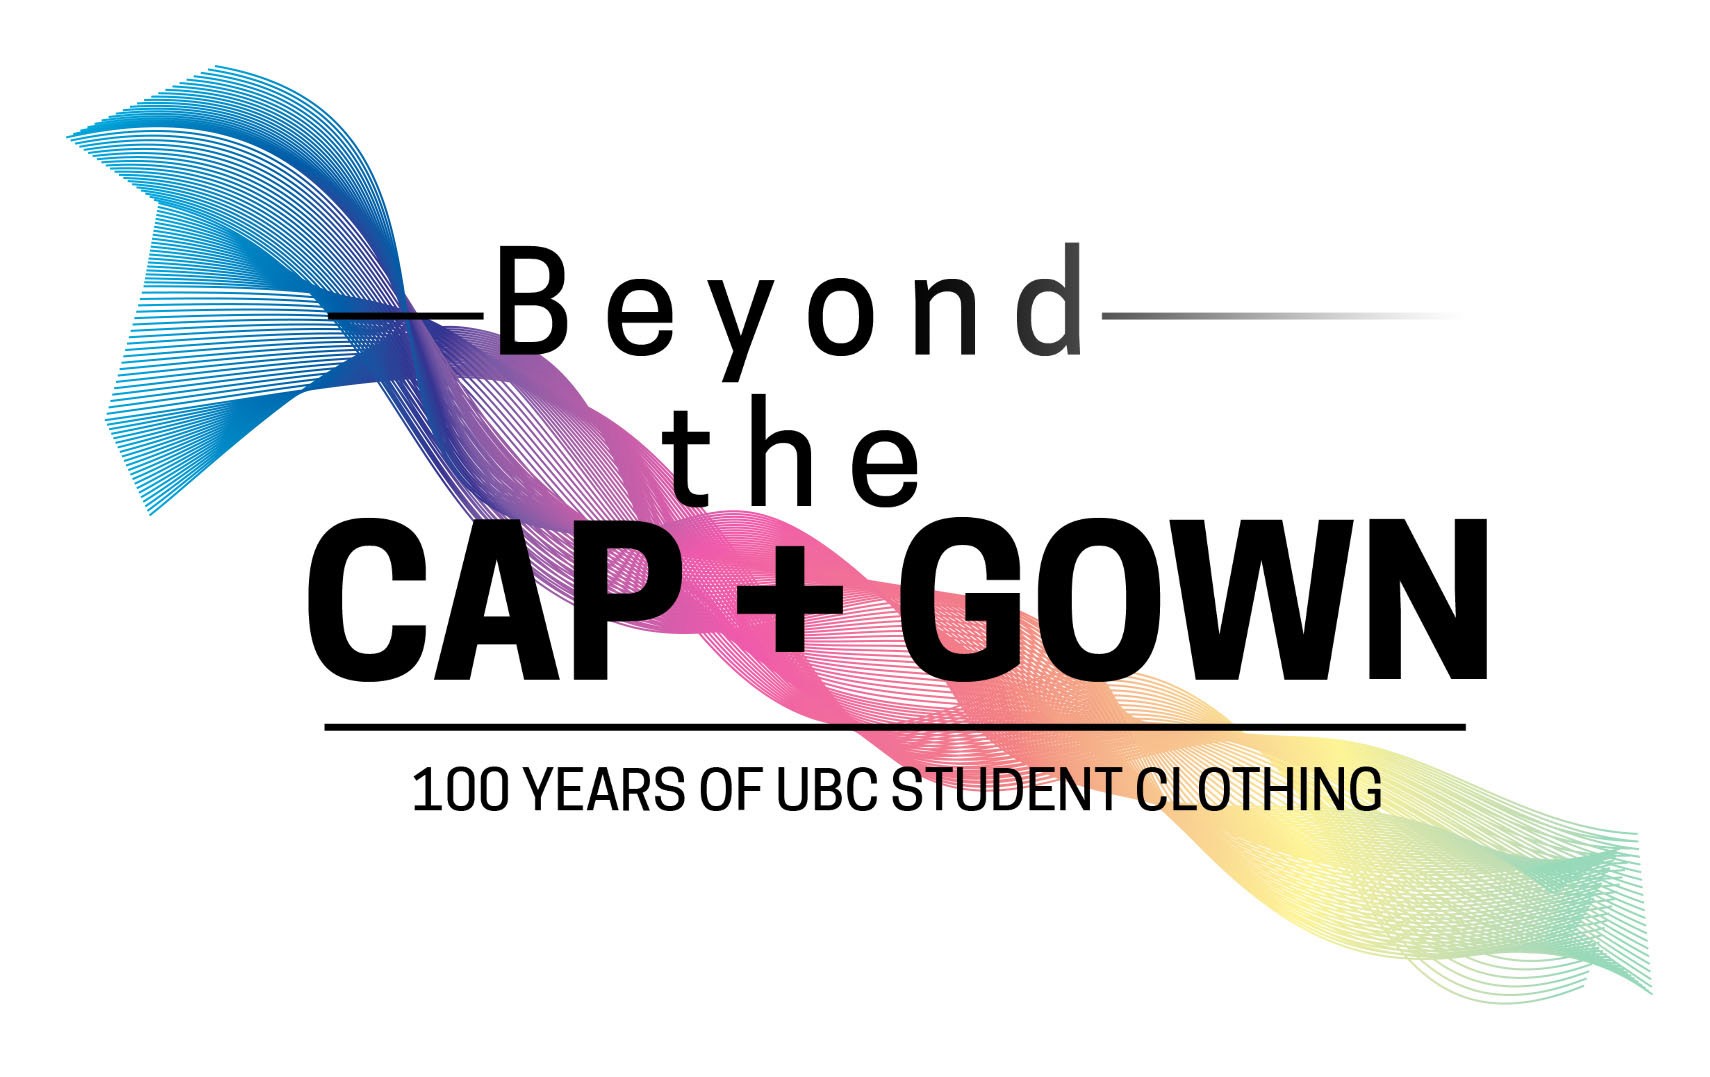 Beyond the Cap and Gown